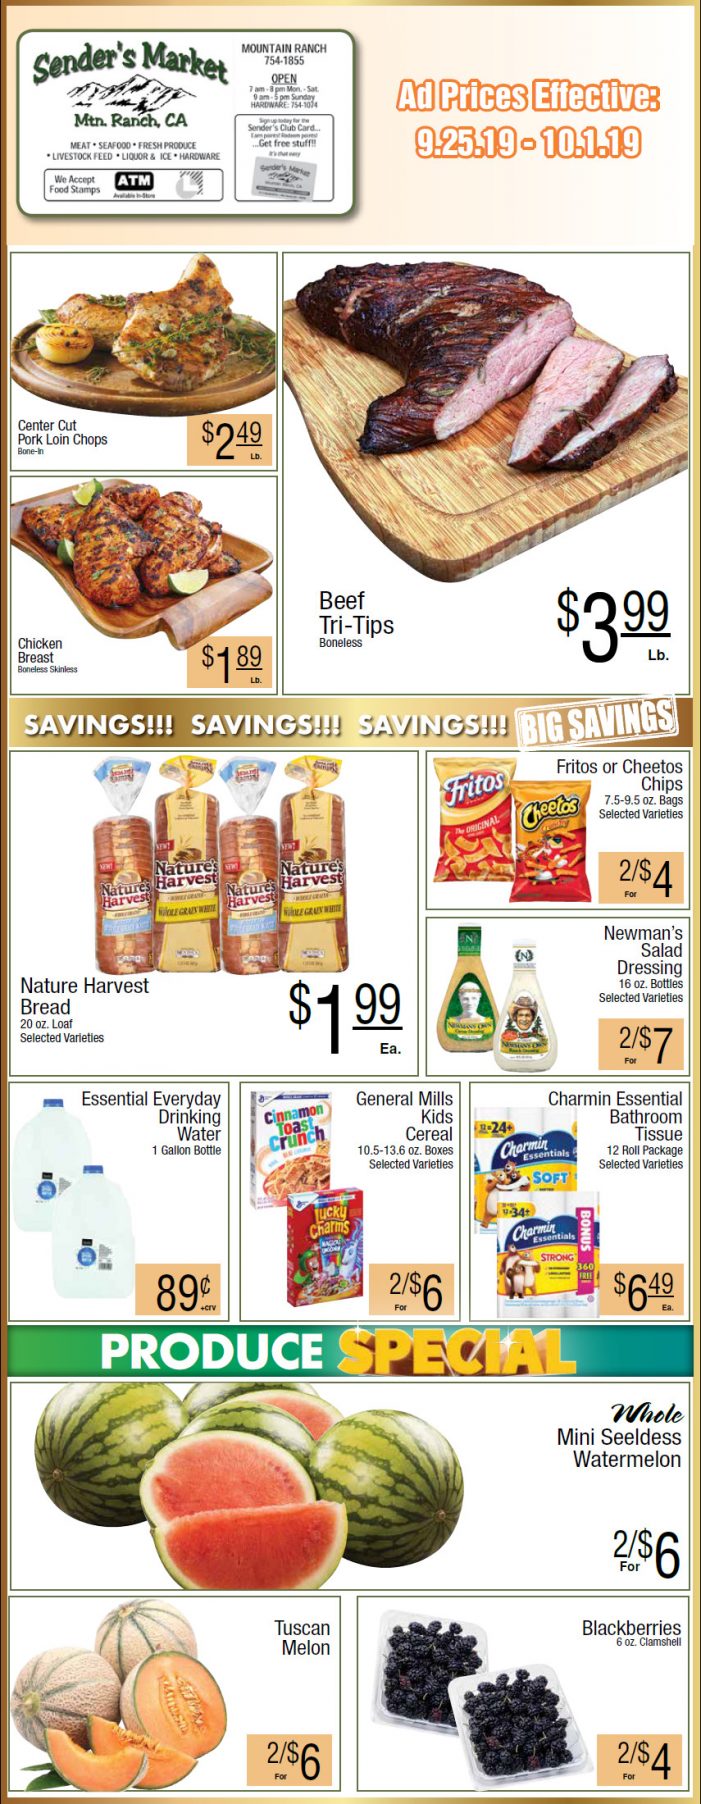 Sender’s Market Weekly Ad & Grocery Specials Through October 1st!